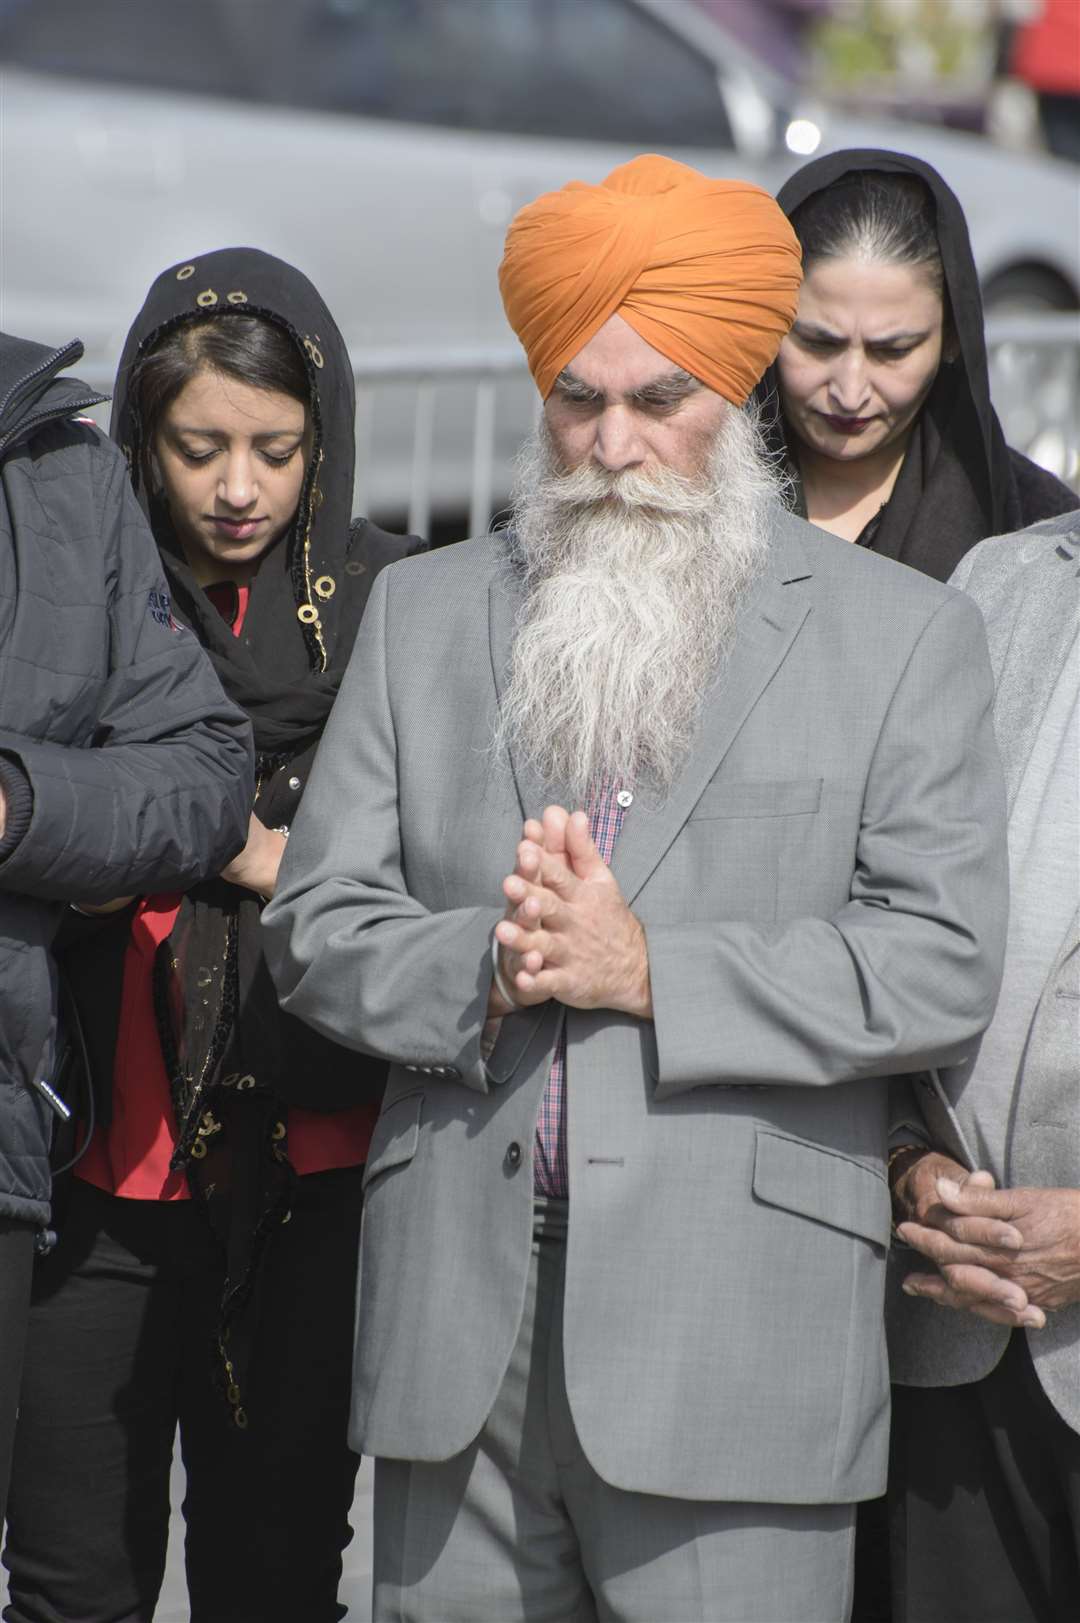 The new president of the Guru Nanak Darbar Gurdwara, Ajaib Singh Cheema supported the application. Picture: Andy Payton.